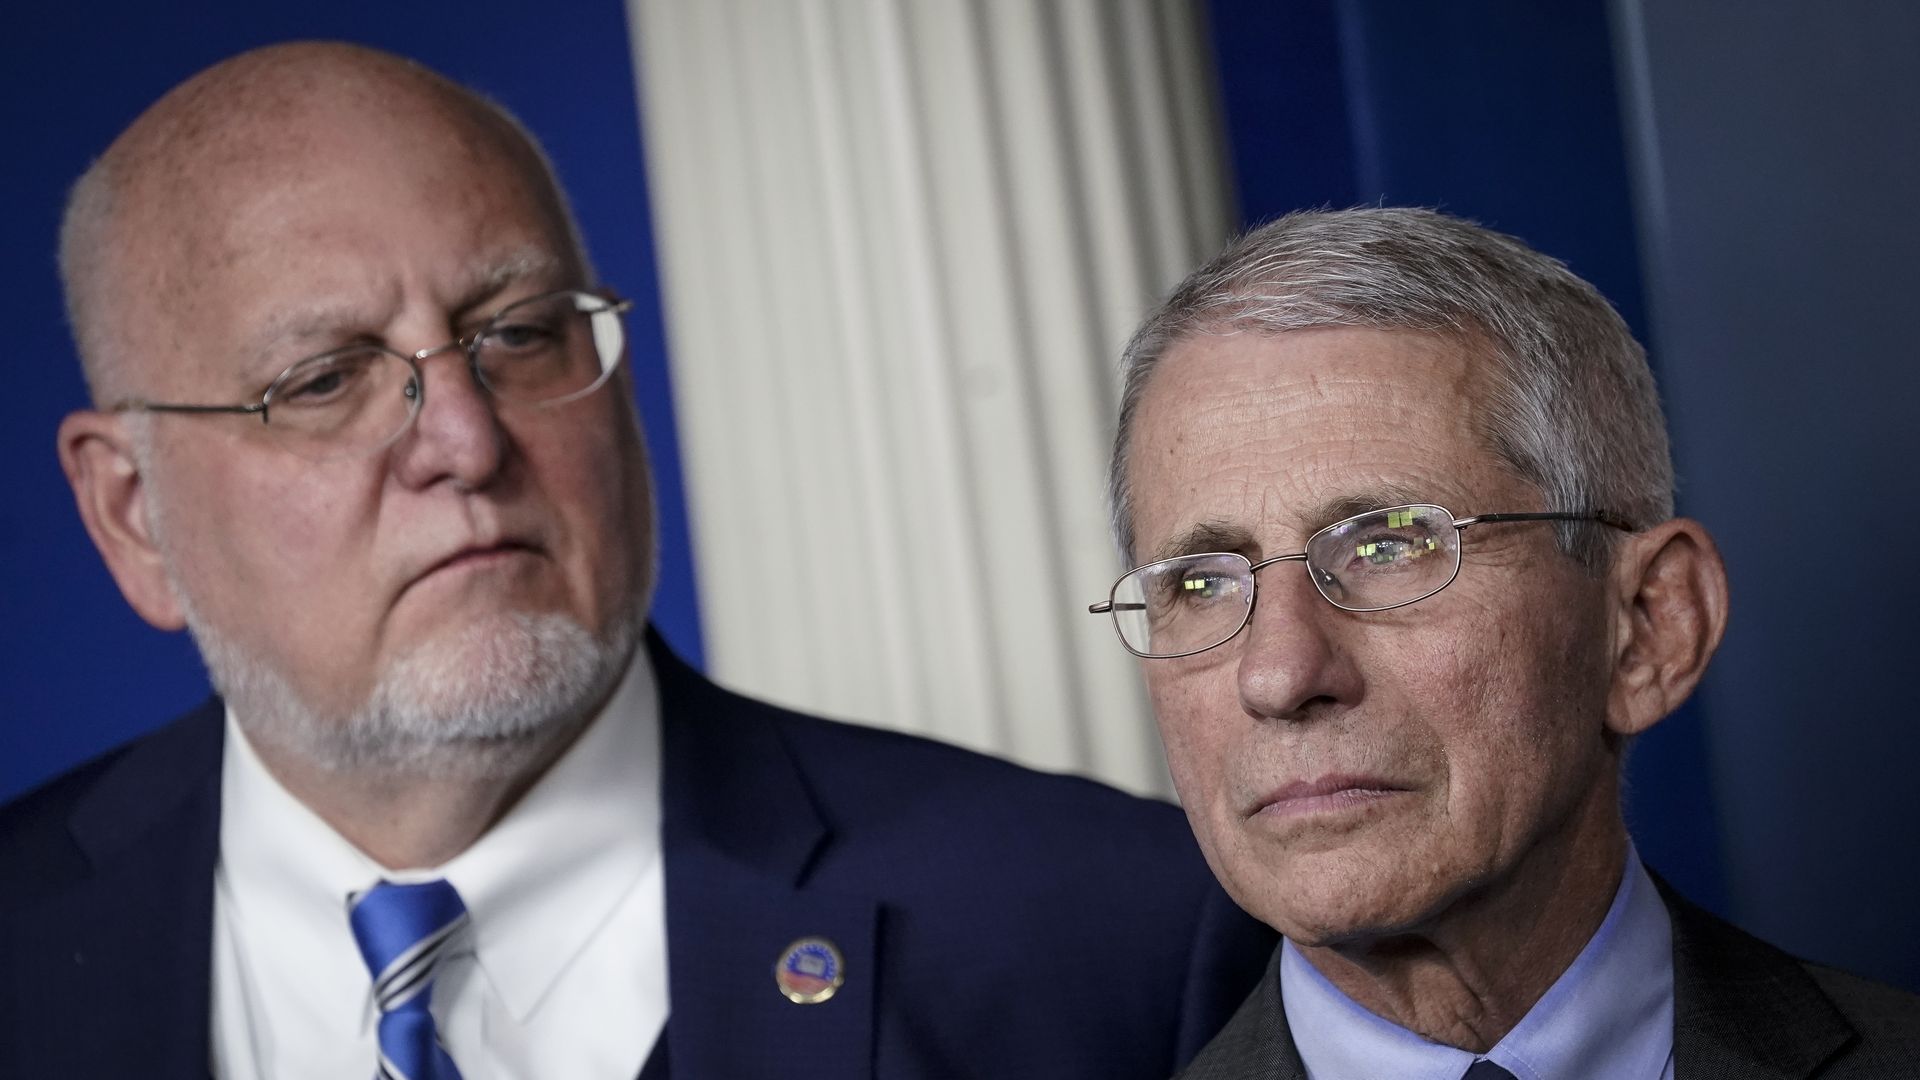 CDC Director Robert Redfield and NIH director Anthony Fauci attend a briefing on the administration's coronavirus response in the press briefing room of the White House on March 2